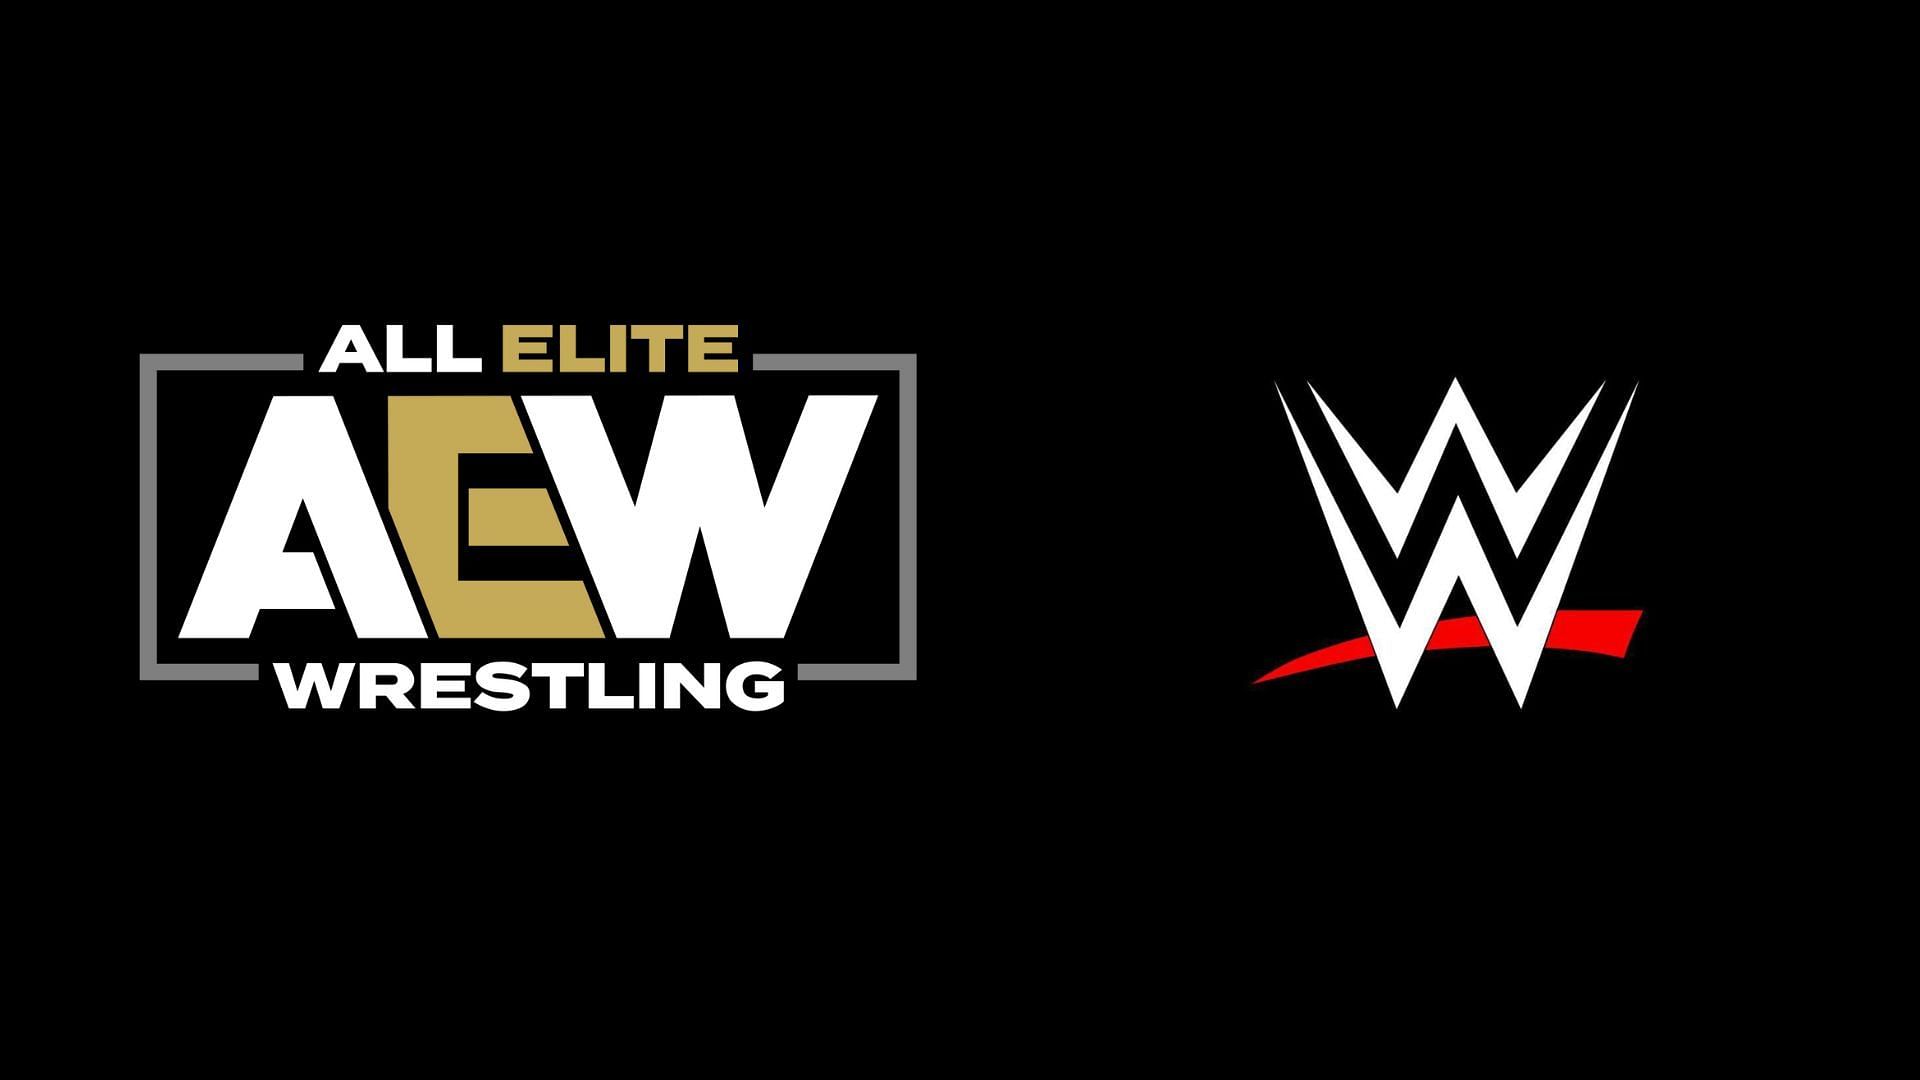 AEW and WWE are after a world renowned tag team